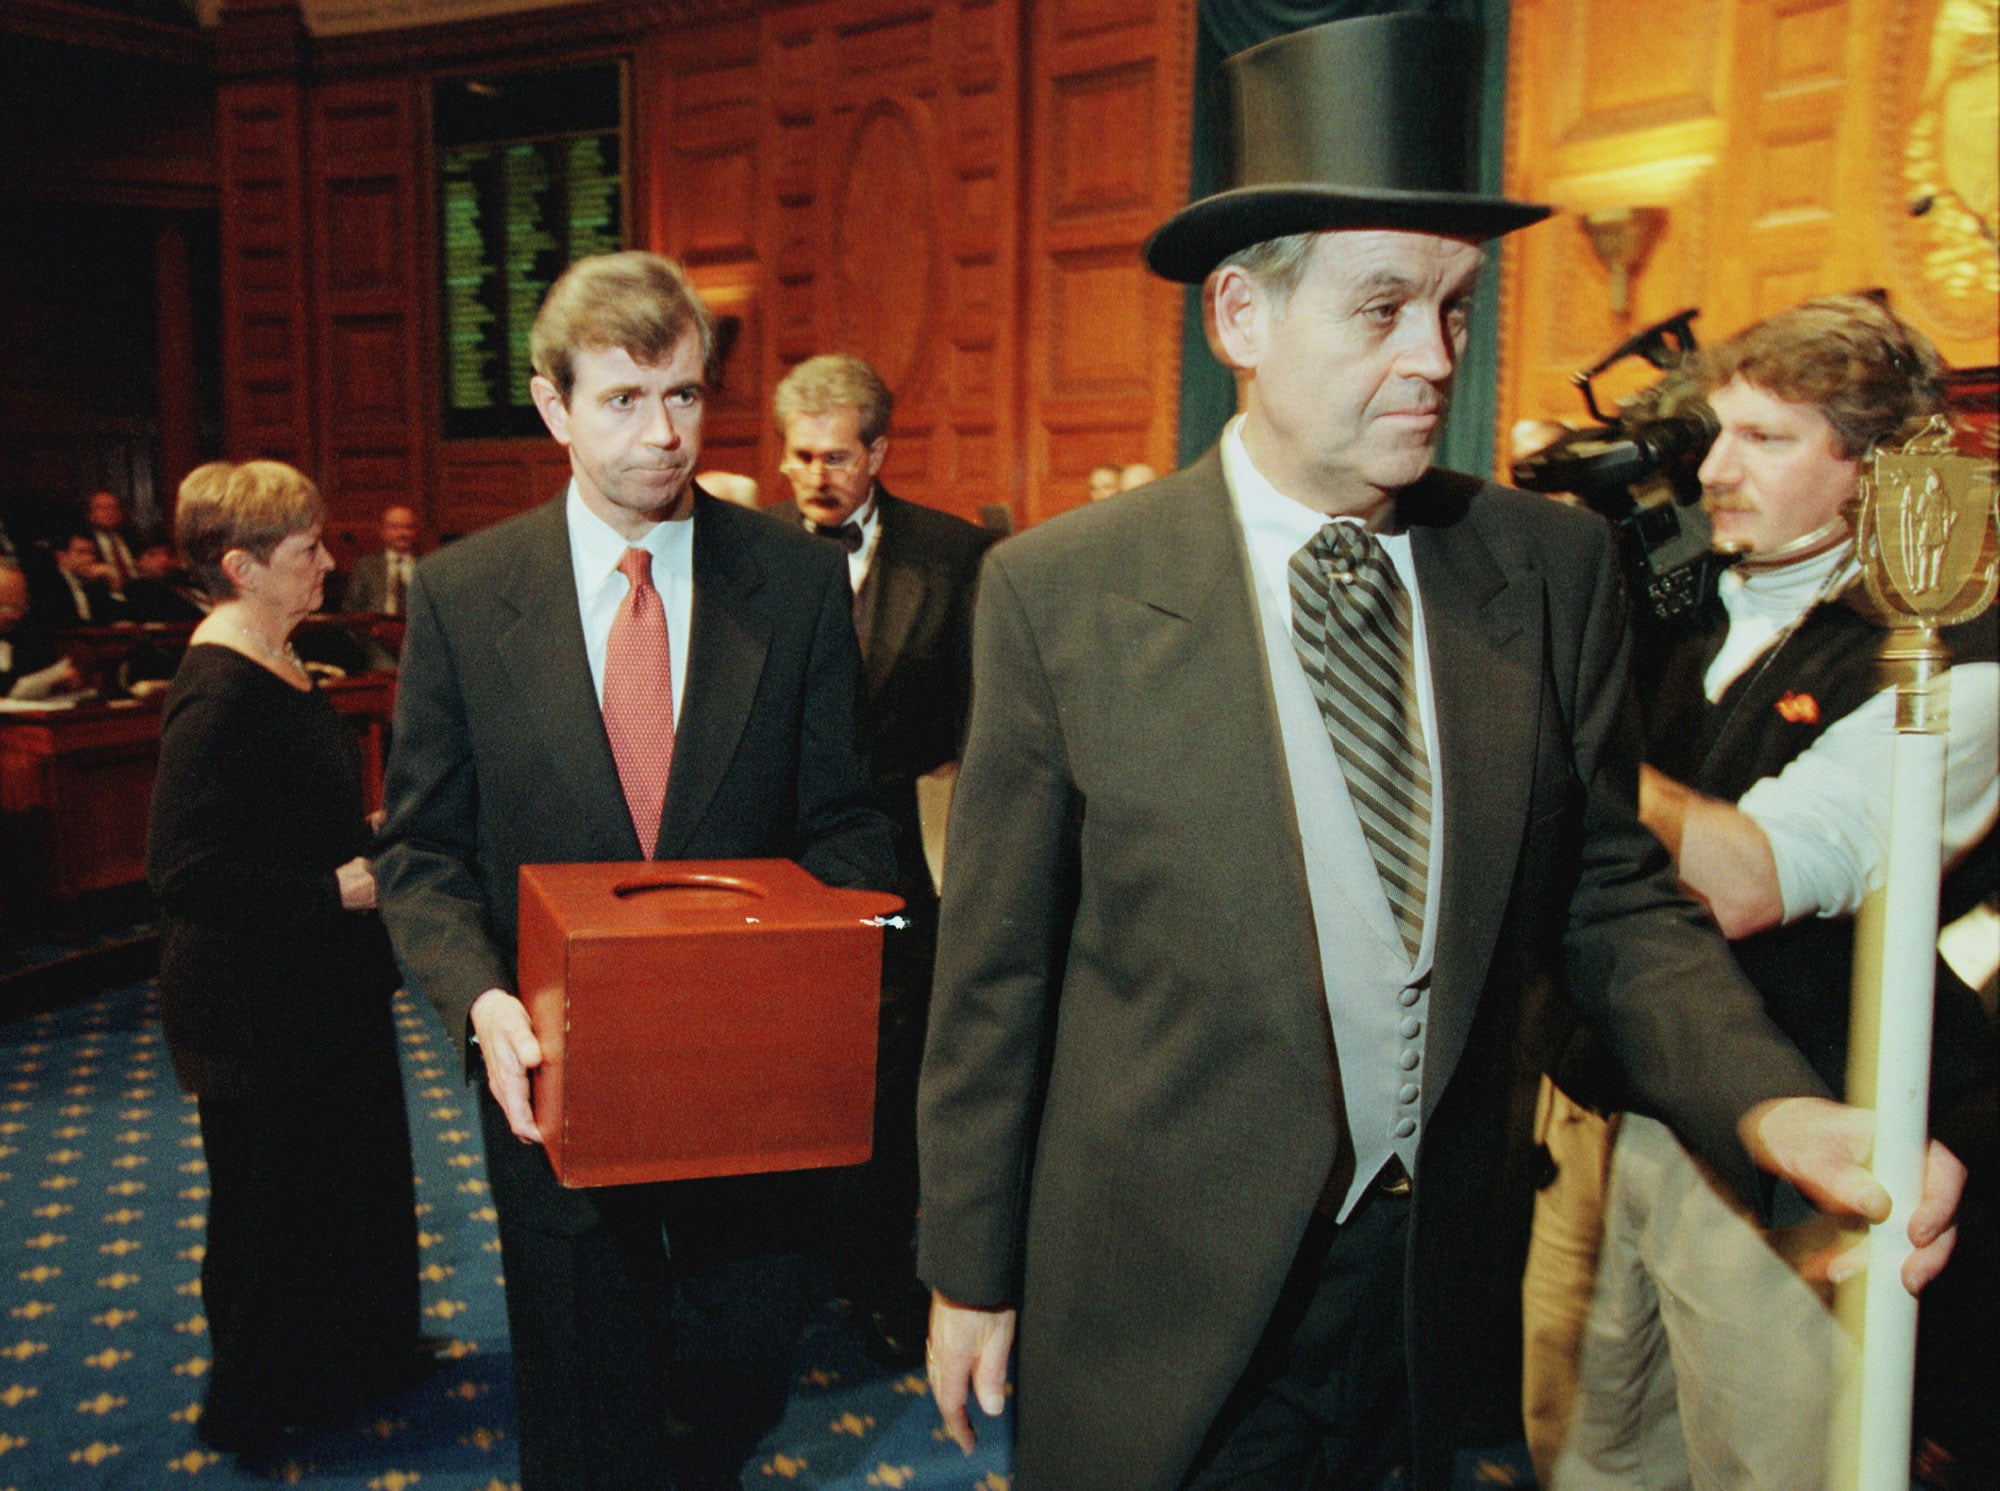 Massachusetts Secretary of the Commonwealth William Galvin, centre, carries a ballot box containing the 12 Massachusetts electoral votes for Vice President Al Gore as he is led by Sergeant-at Arms Michael Rea, right, during the Electoral College voting at the Statehouse on 18 December 2000 in Boston